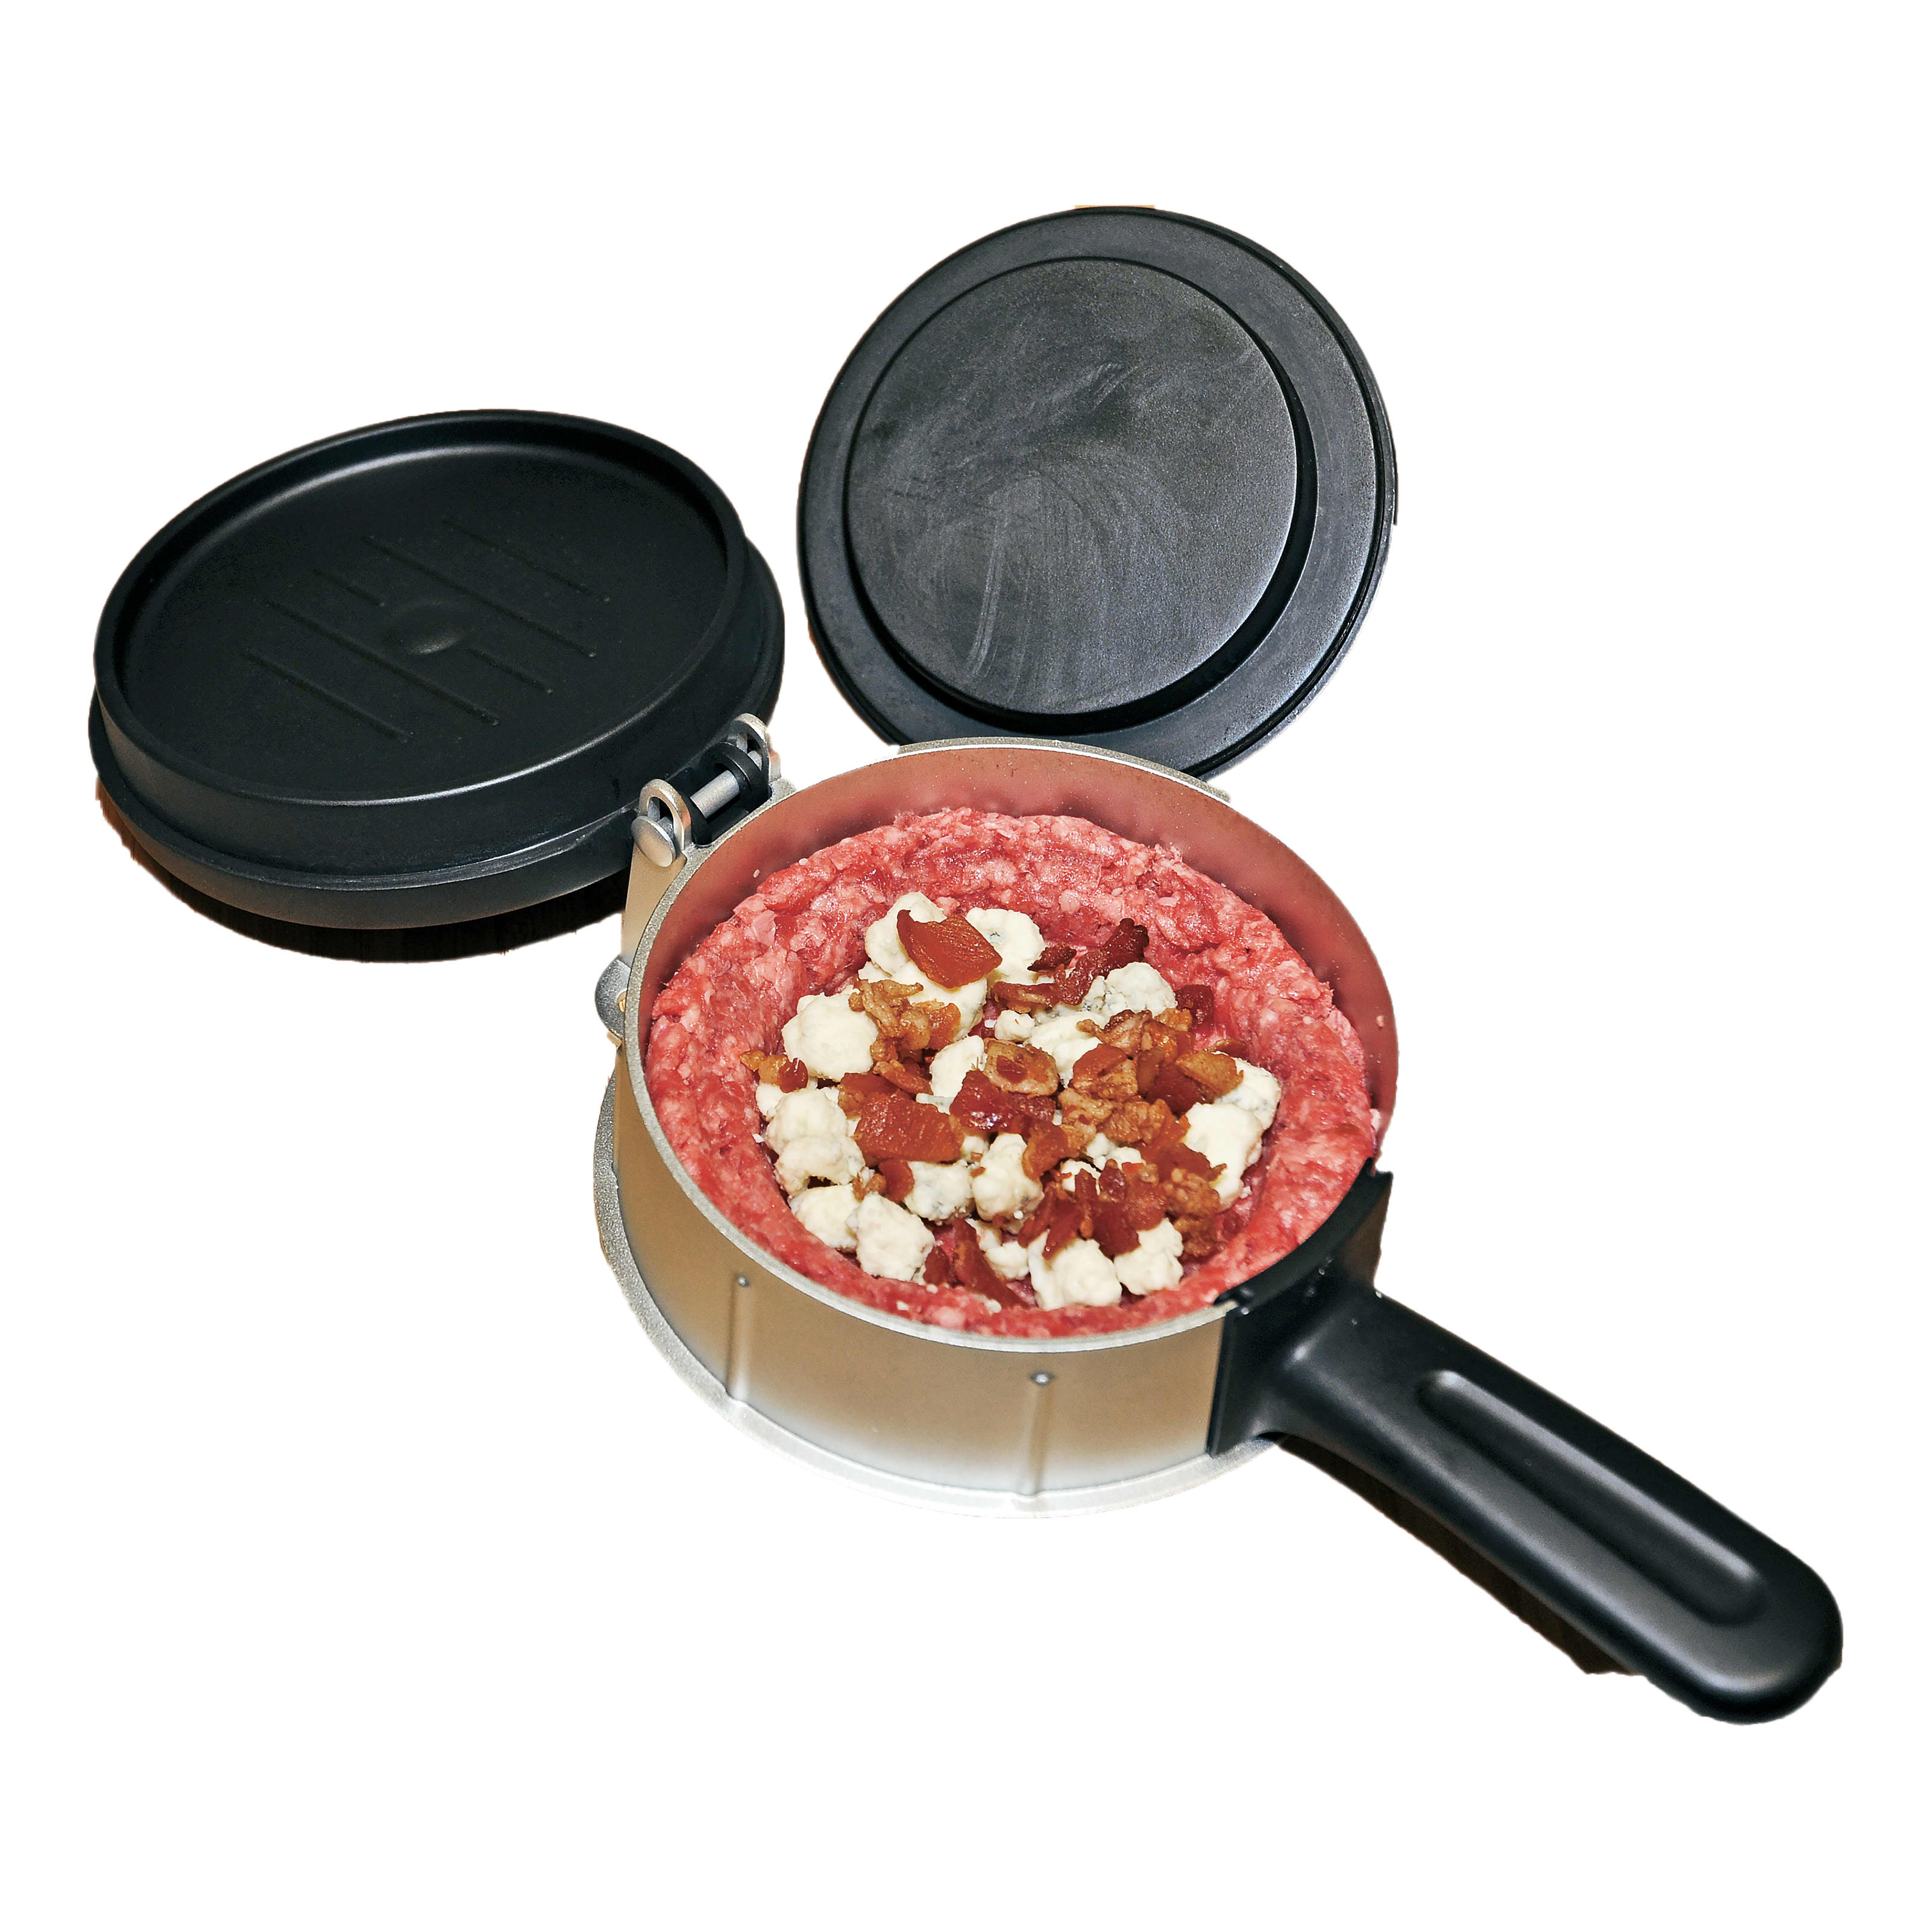 Bass Pro Shops® Breader Bowl and Onion Blossom Maker